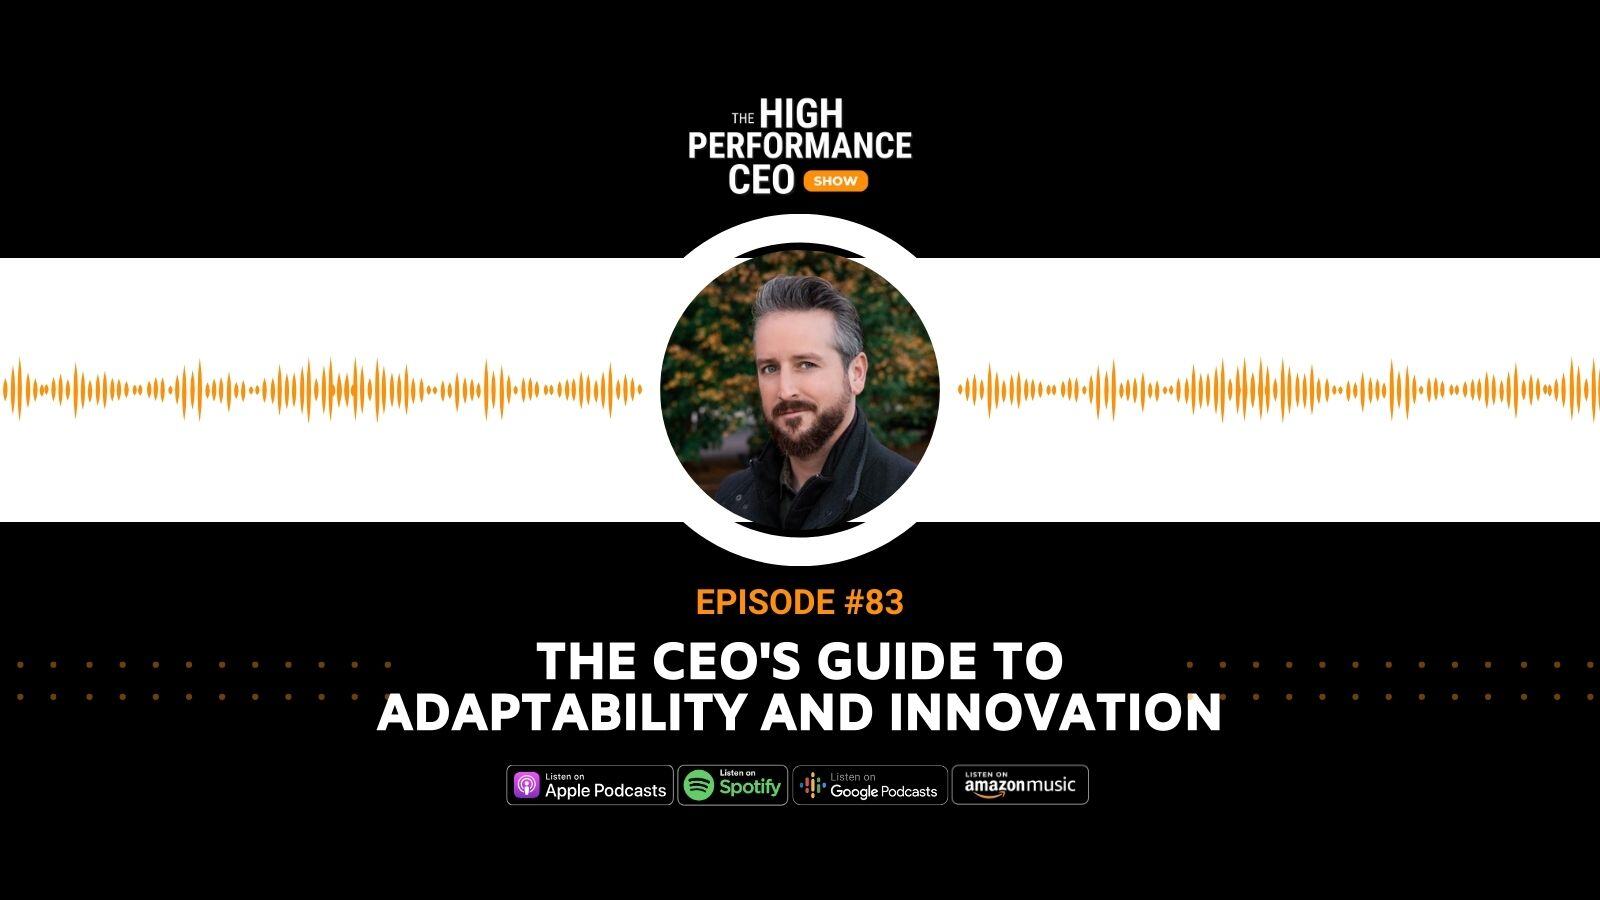 The CEO's Guide to Adaptability and Innovation